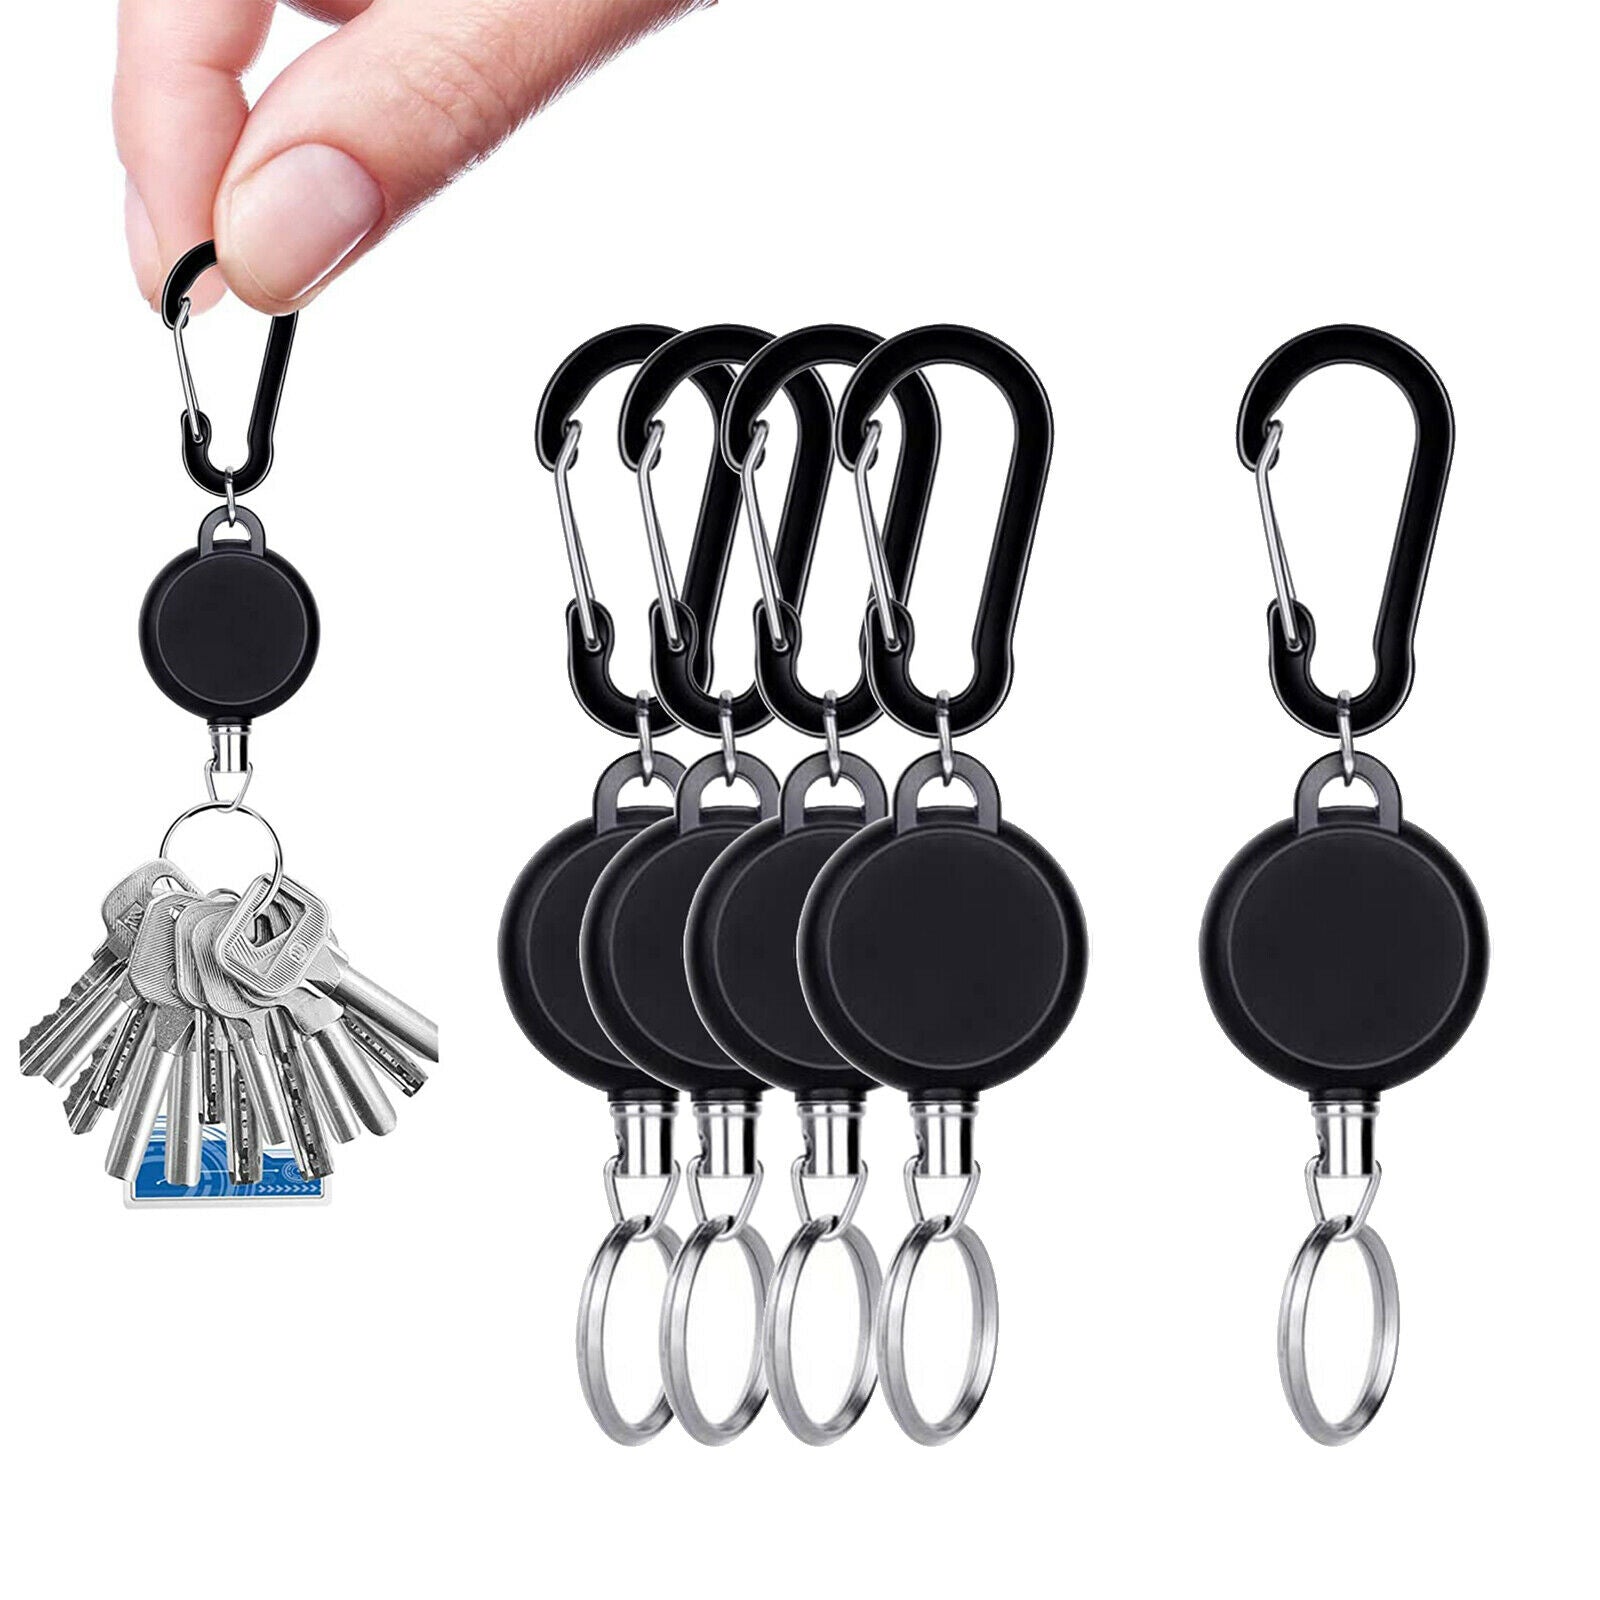 5x Compact Retractable Key Chain Recoil Keychain ID Card Keeper Retainer